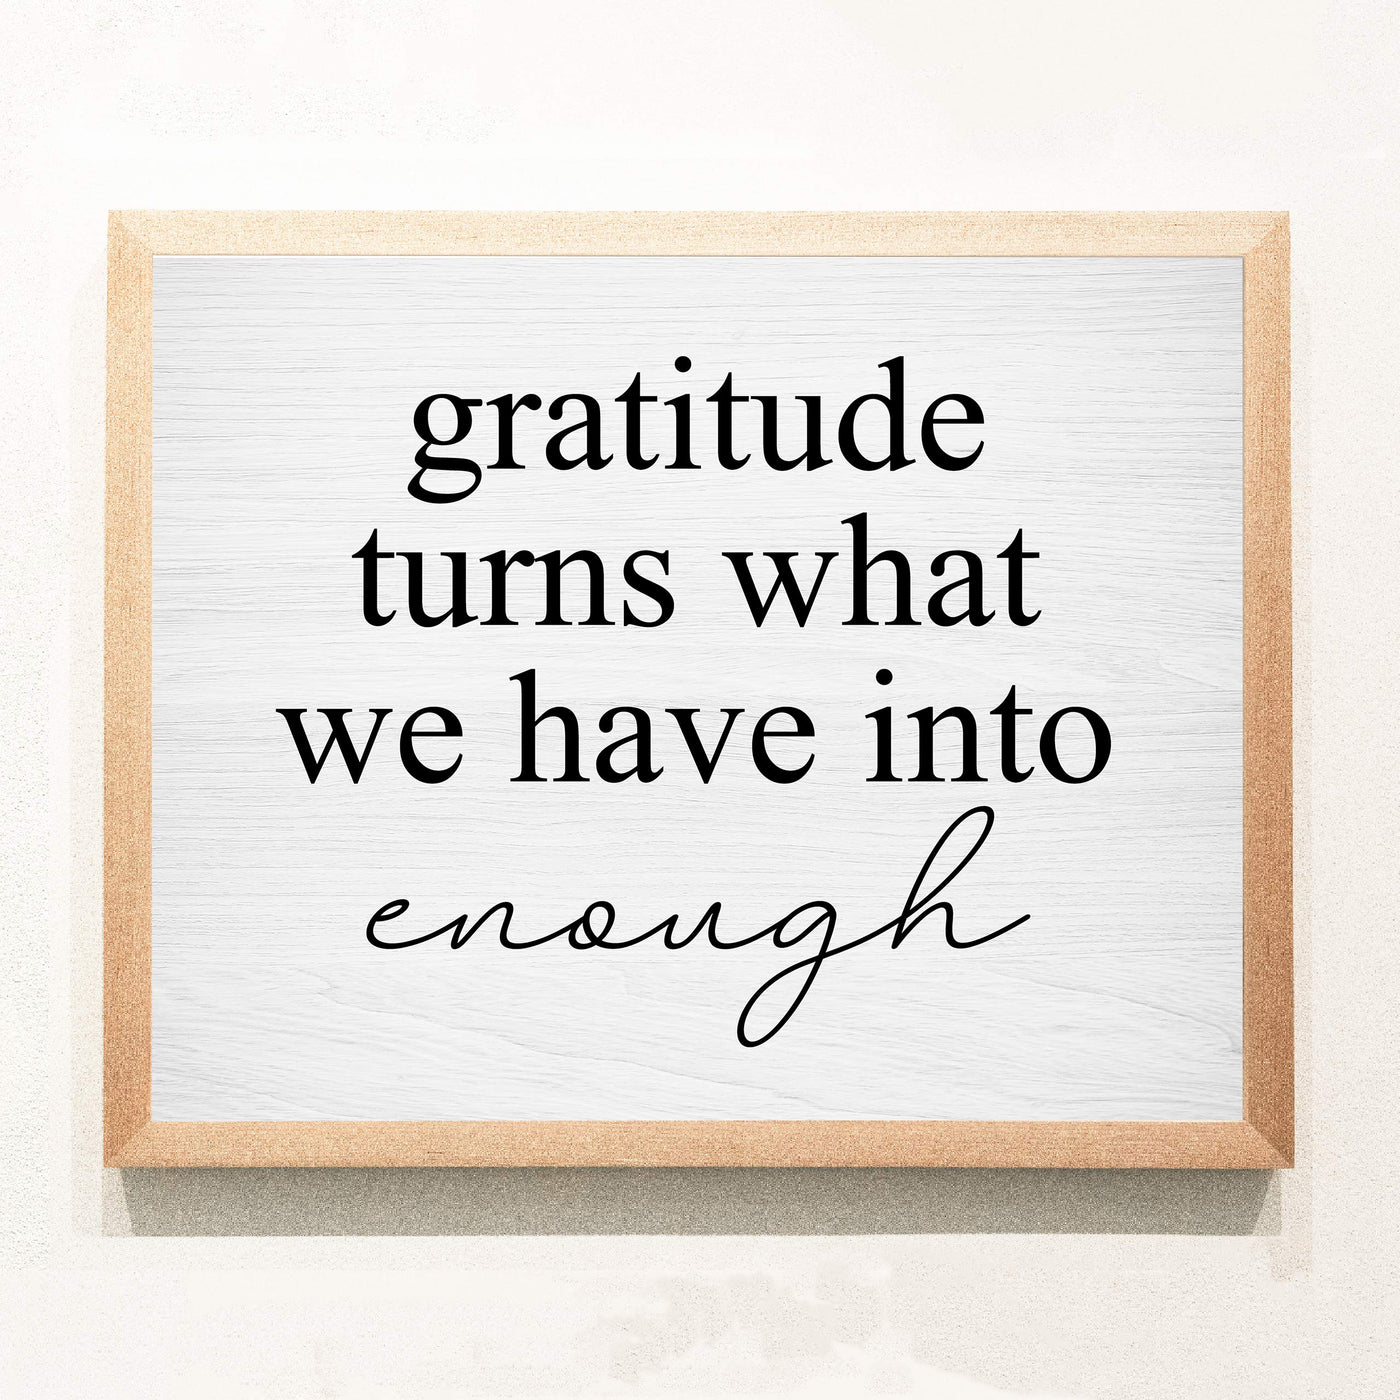 Gratitude-Turns What We Have Into Enough-Inspirational Wall Art Sign- 14 x 11" Modern Typographic Print w/Distressed Wood Design-Ready to Frame. Home-Office-Family Room Decor. Printed on Paper.